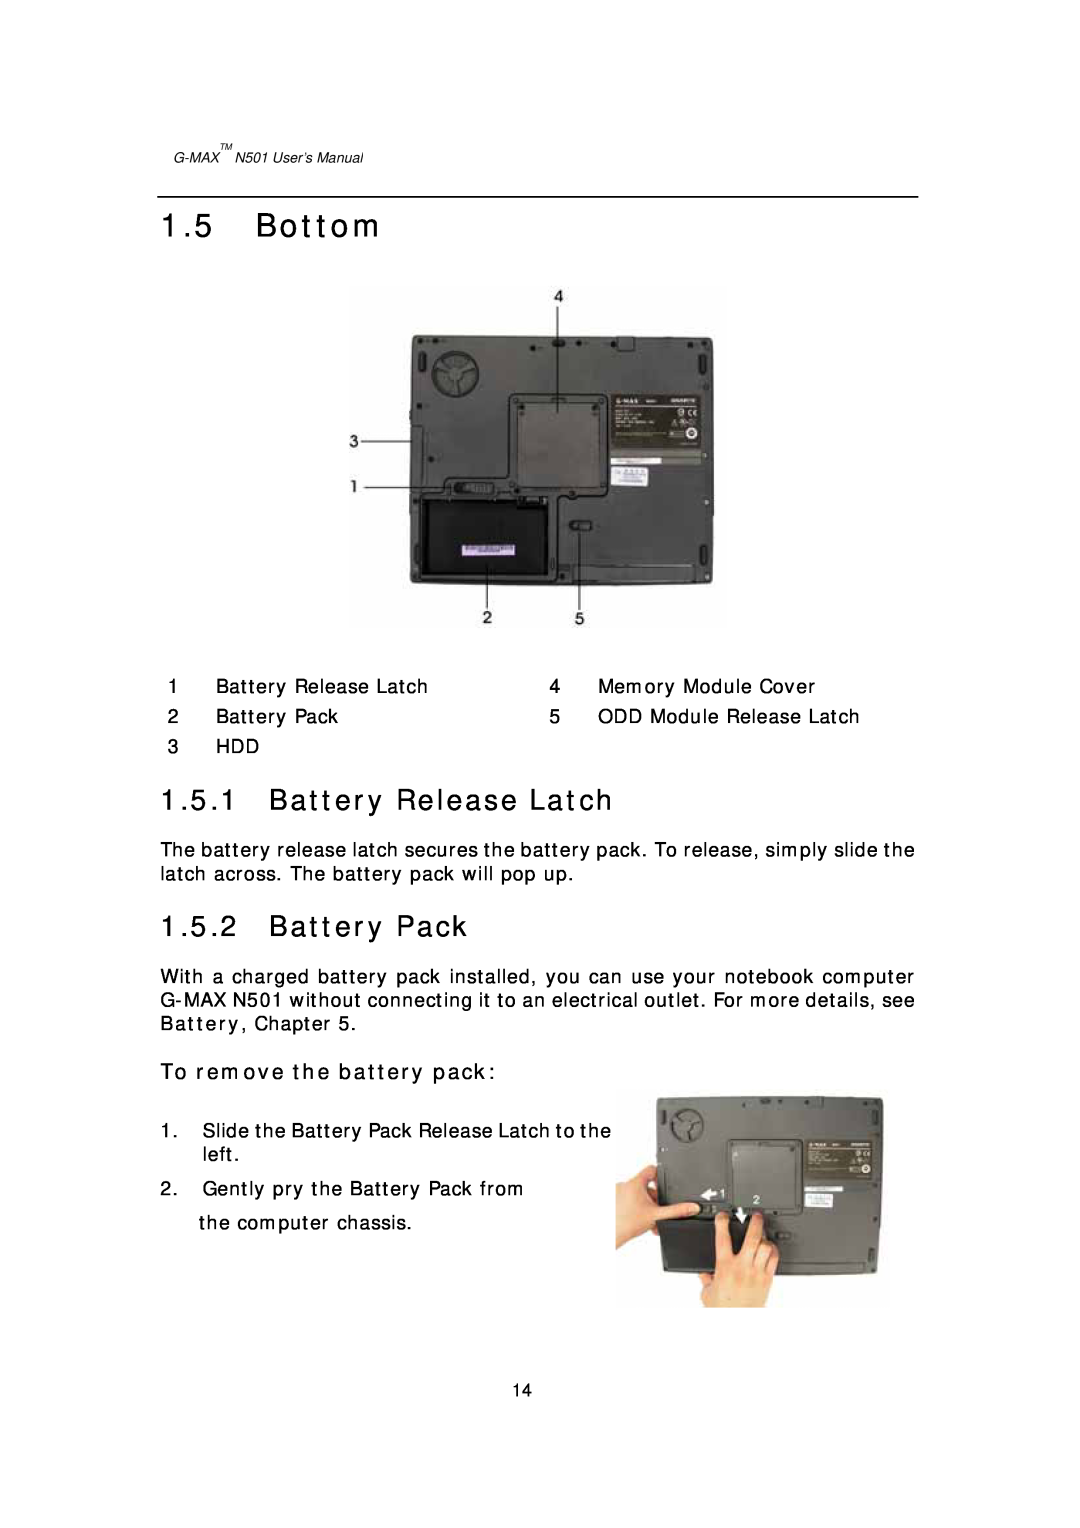 Gigabyte G-MAX N501 user manual Bottom, Battery Release Latch, Battery Pack, To remove the battery pack 